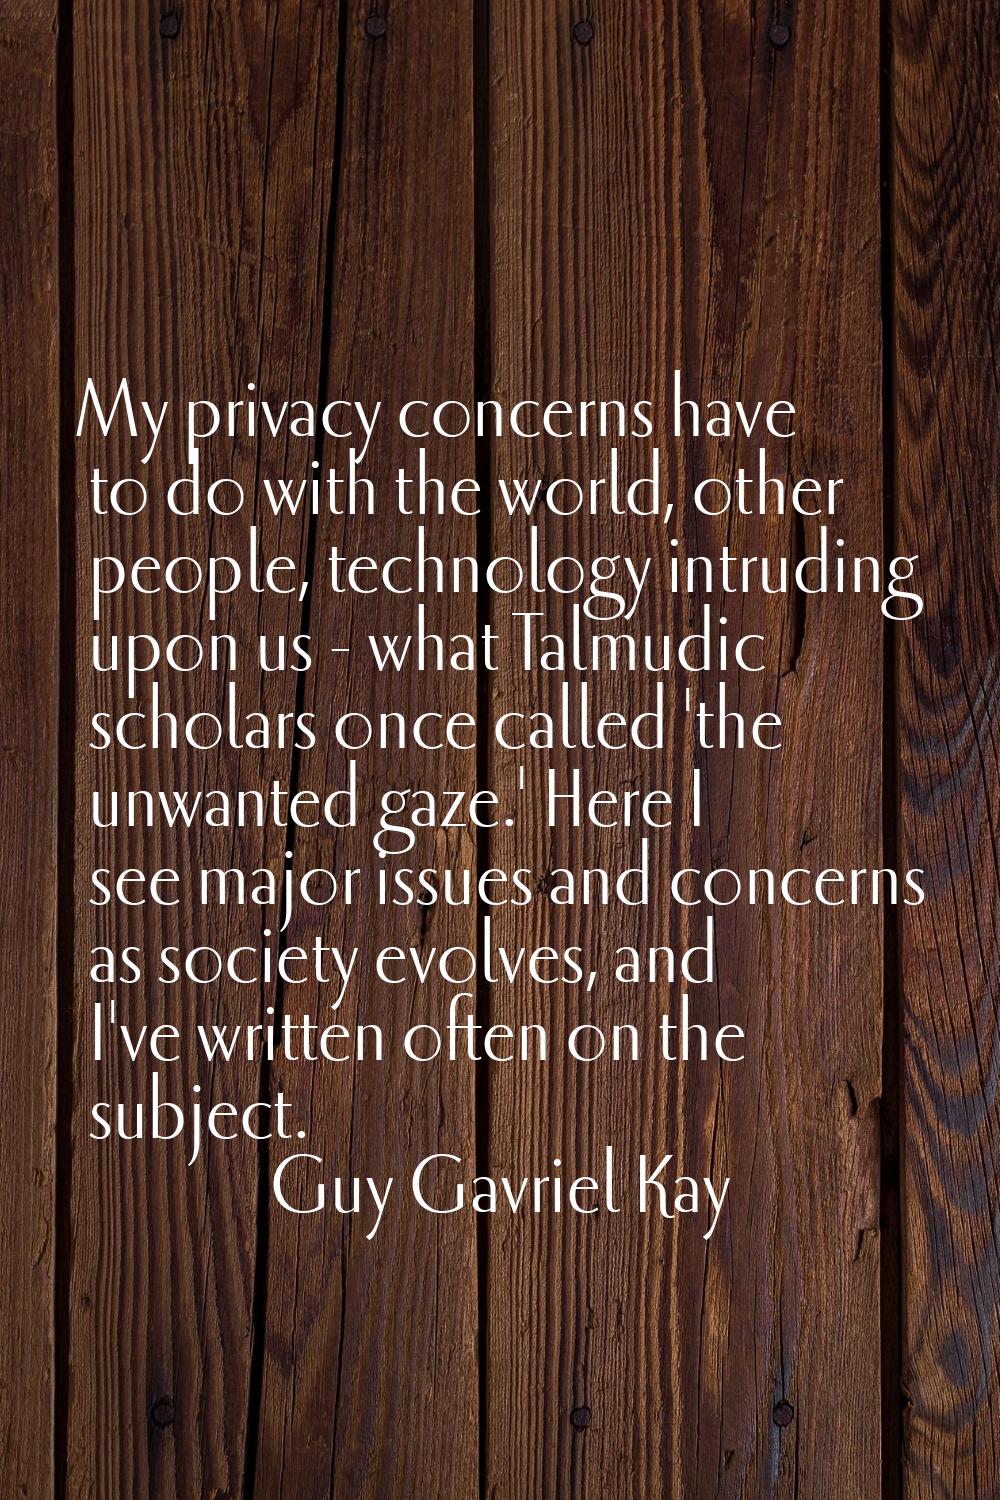 My privacy concerns have to do with the world, other people, technology intruding upon us - what Ta